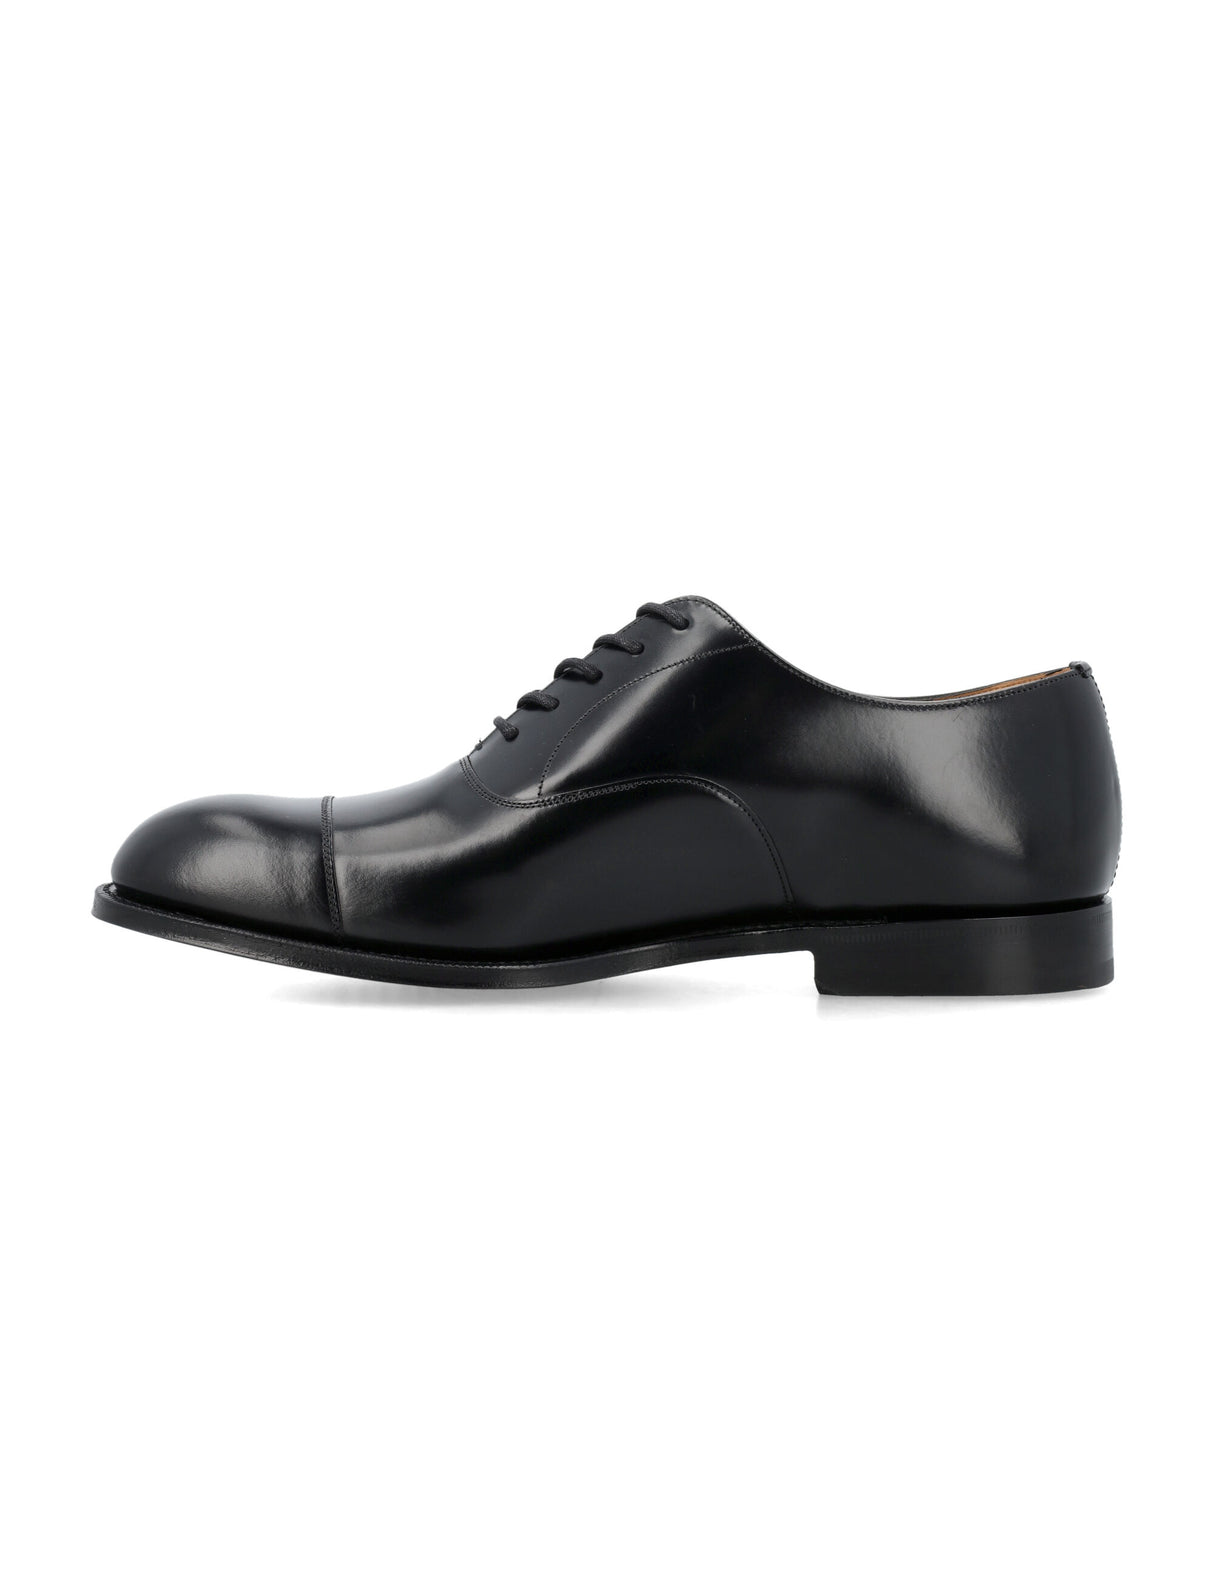 CHURCH'S Black Leather Derby Dress Shoes with Classic Stitching and Cotton Laces